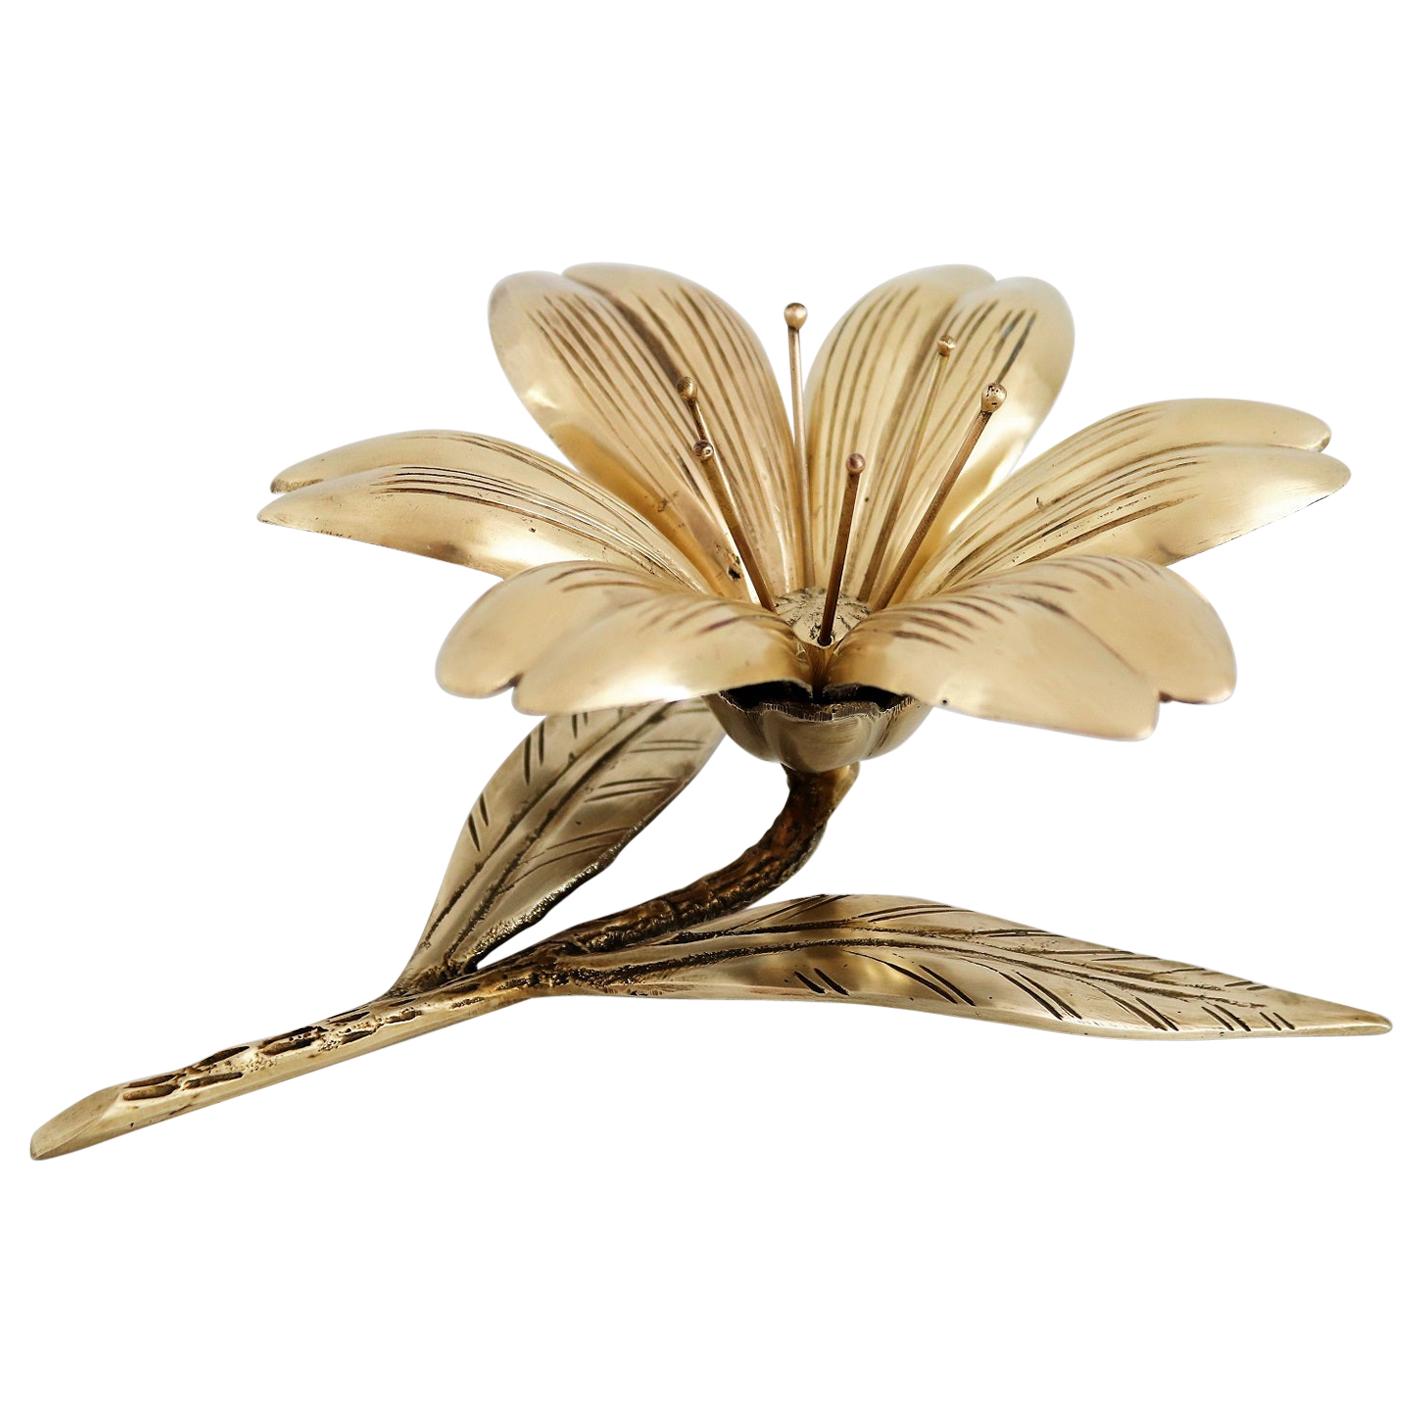 Italian Midcentury Flower in Brass with Petal Ashtrays for Cigarettes ...